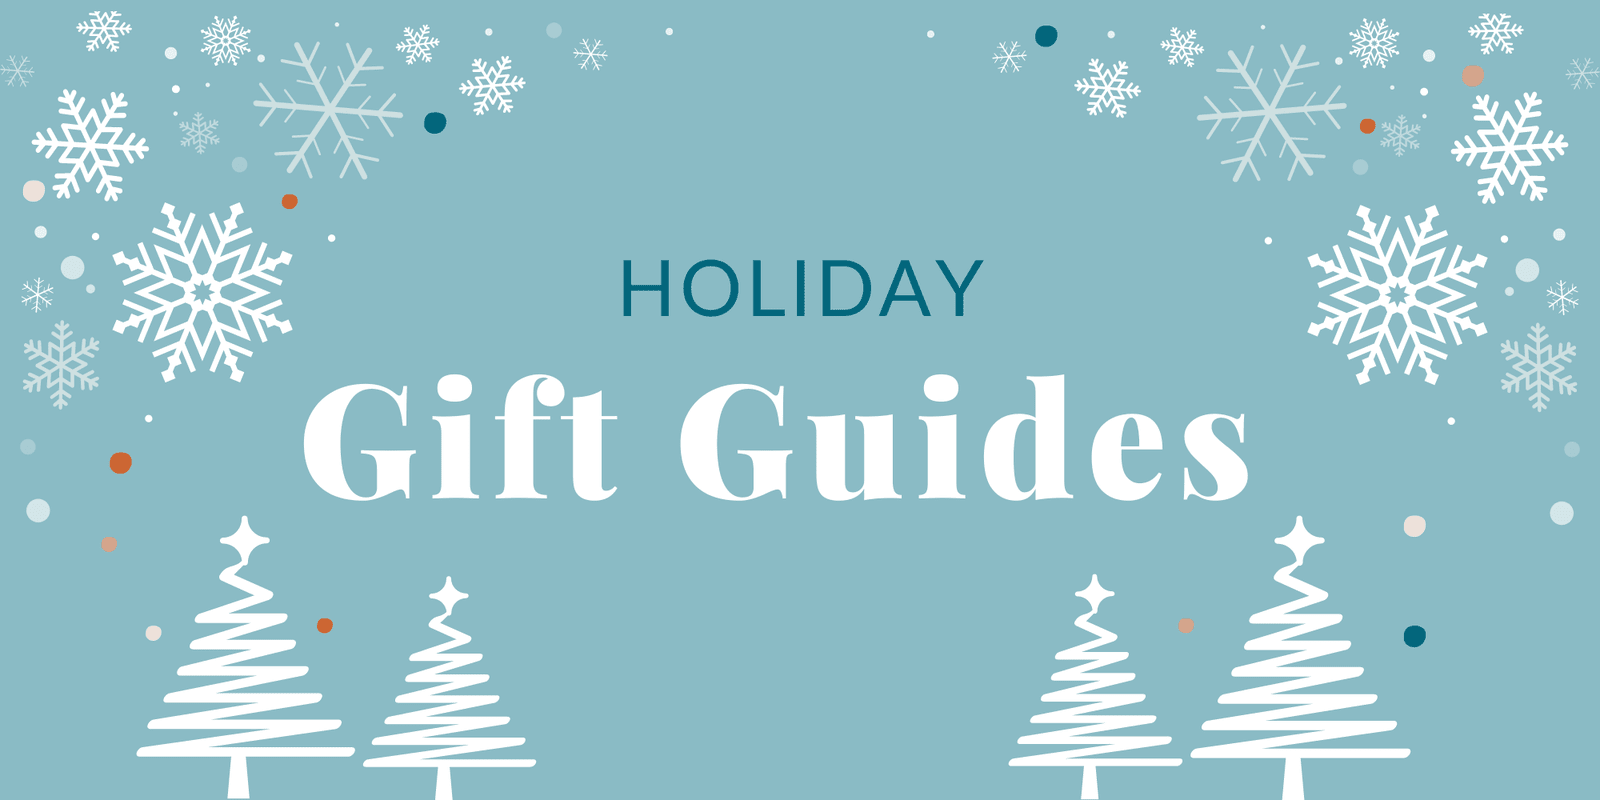 WILDCRAFT'S GIFT GUIDES